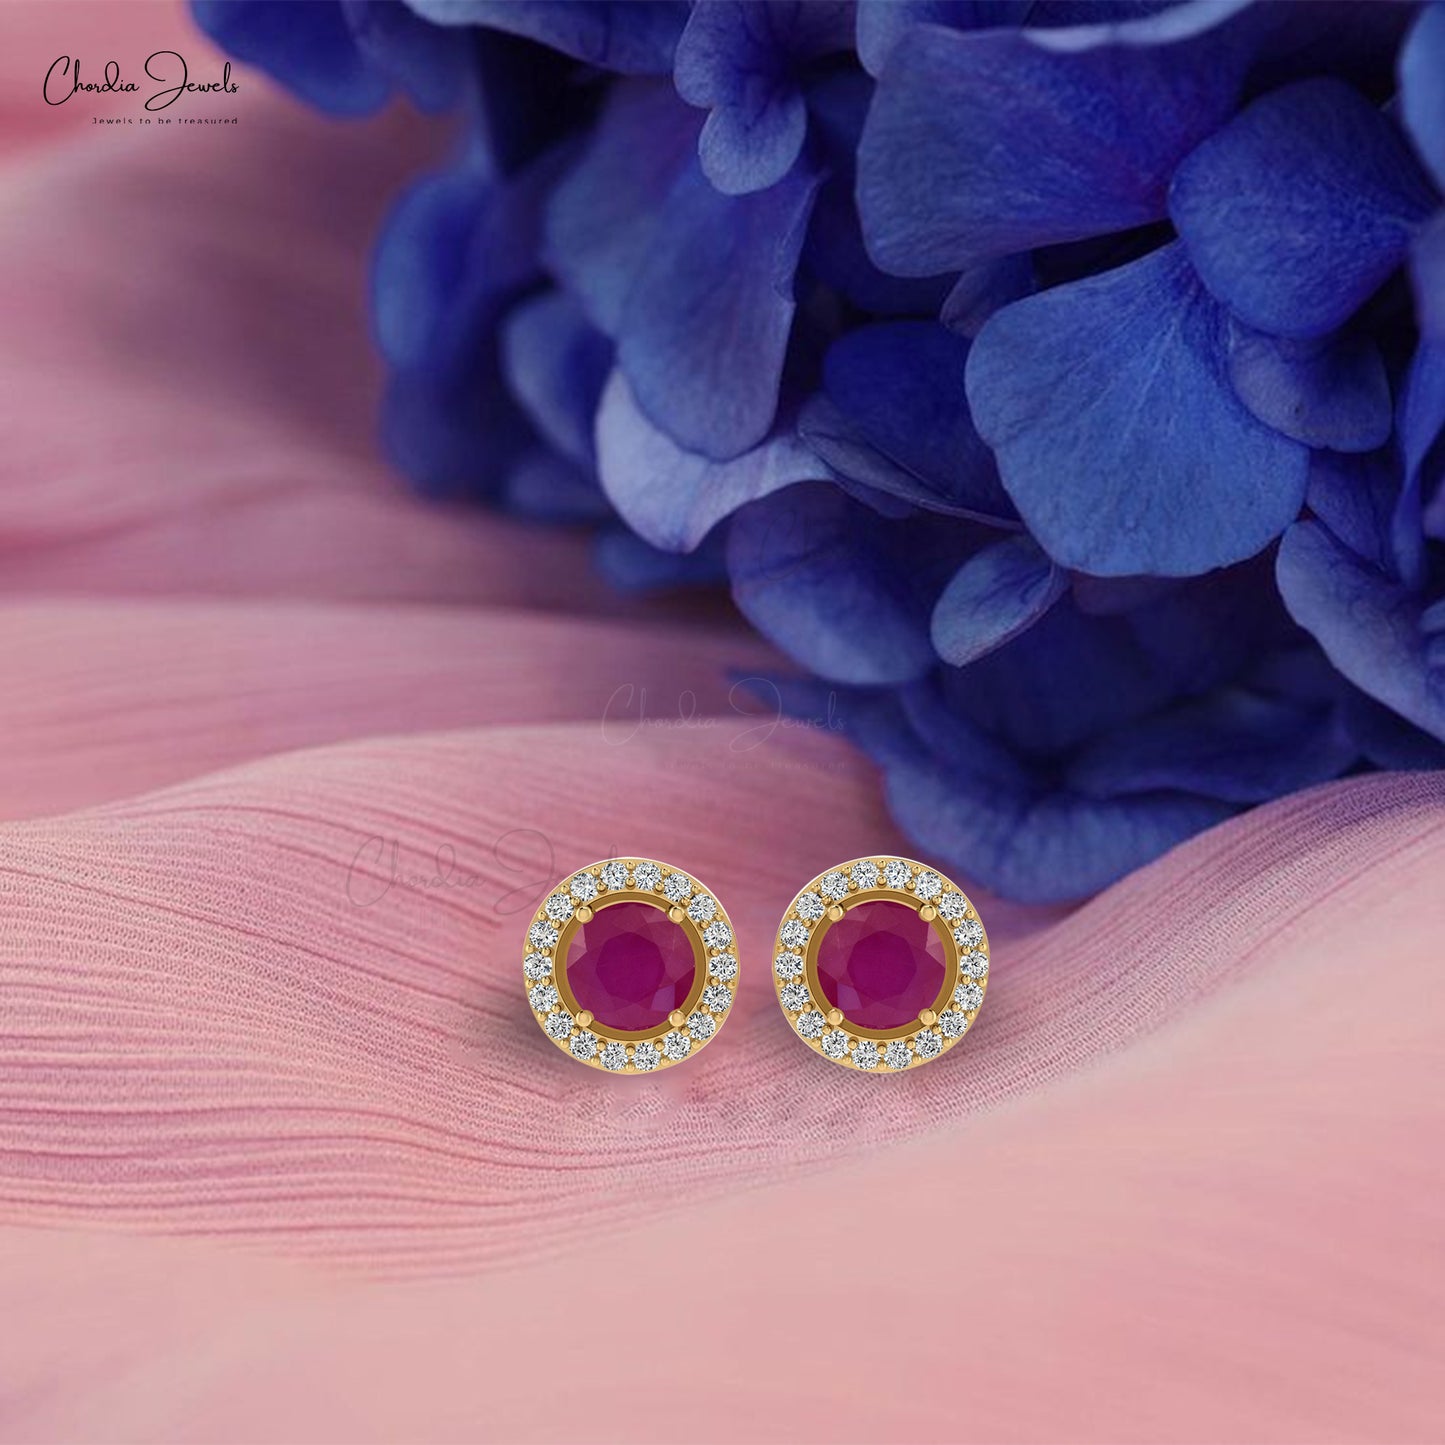 High Class 14K Solid Gold Round Cut Ruby & G-H Diamond Halo Earrings